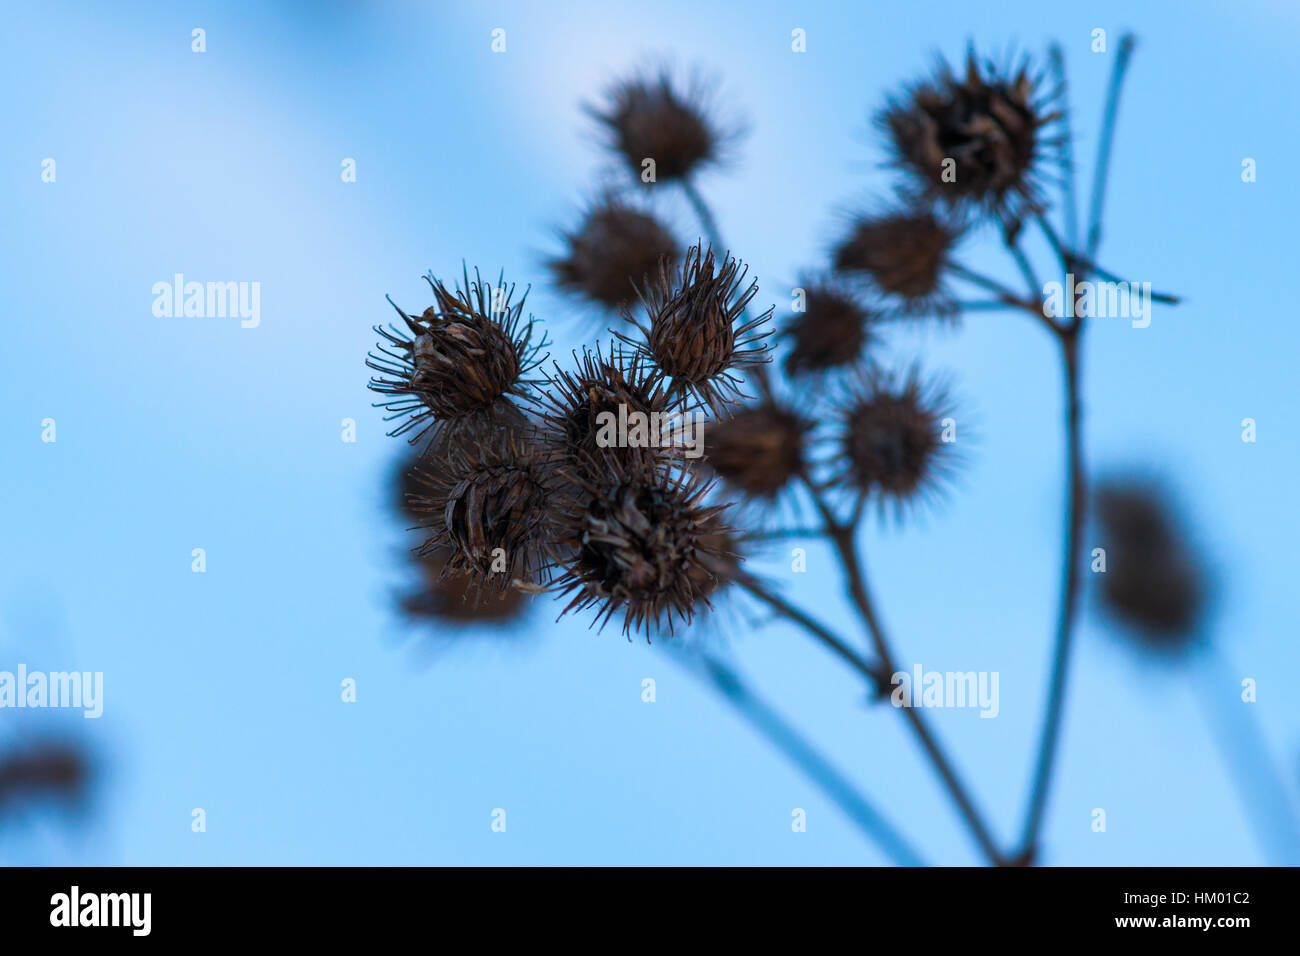 Dry common burdock against soft blue background of winter day Stock Photo